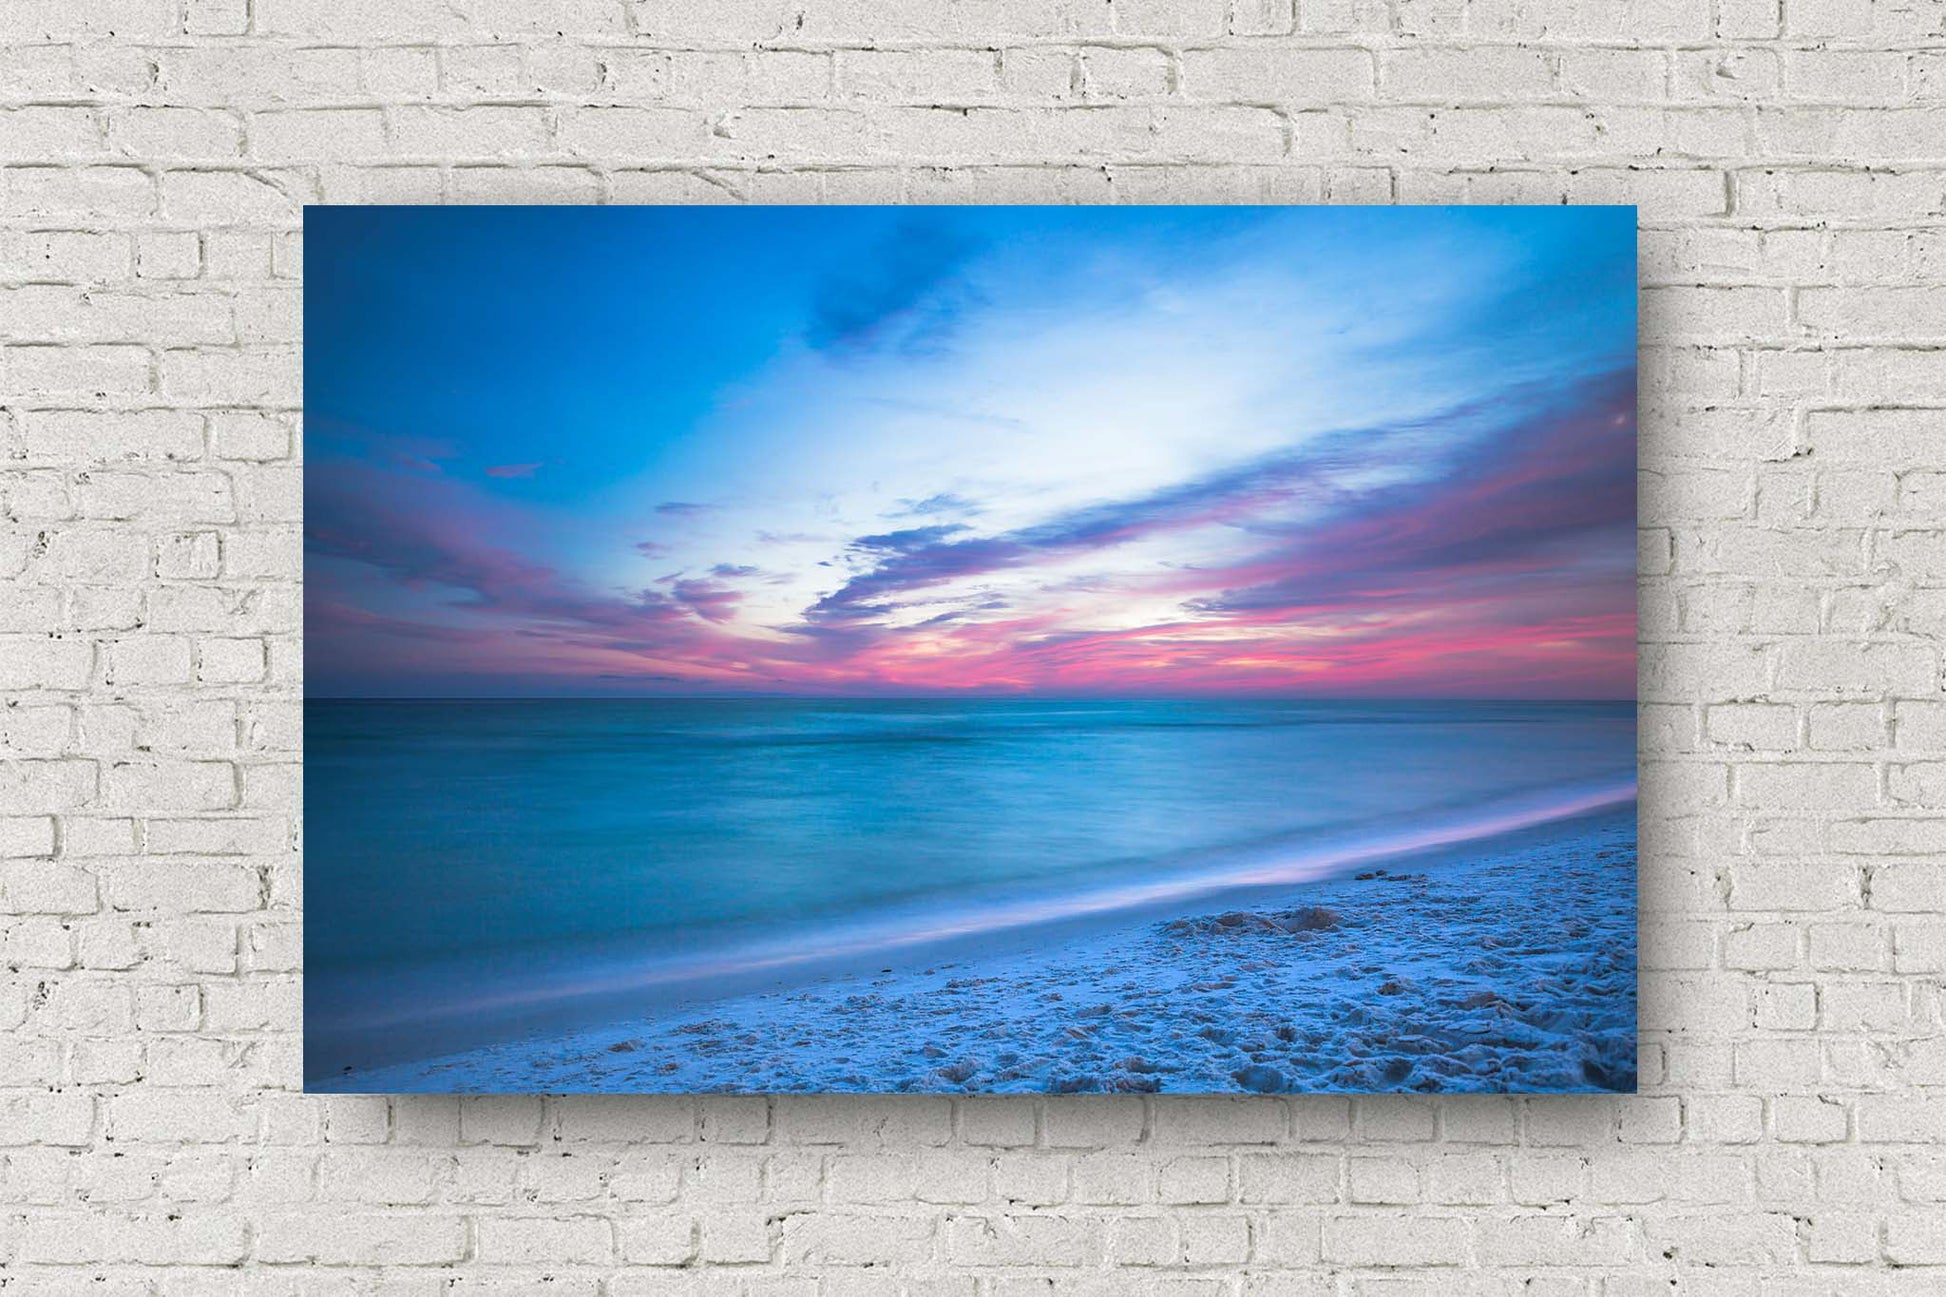 Coastal metal print wall art of a relaxing sunset over the emerald waters of the Gulf Coast along a beach near Destin, Florida by Sean Ramsey of Southern Plains Photography.